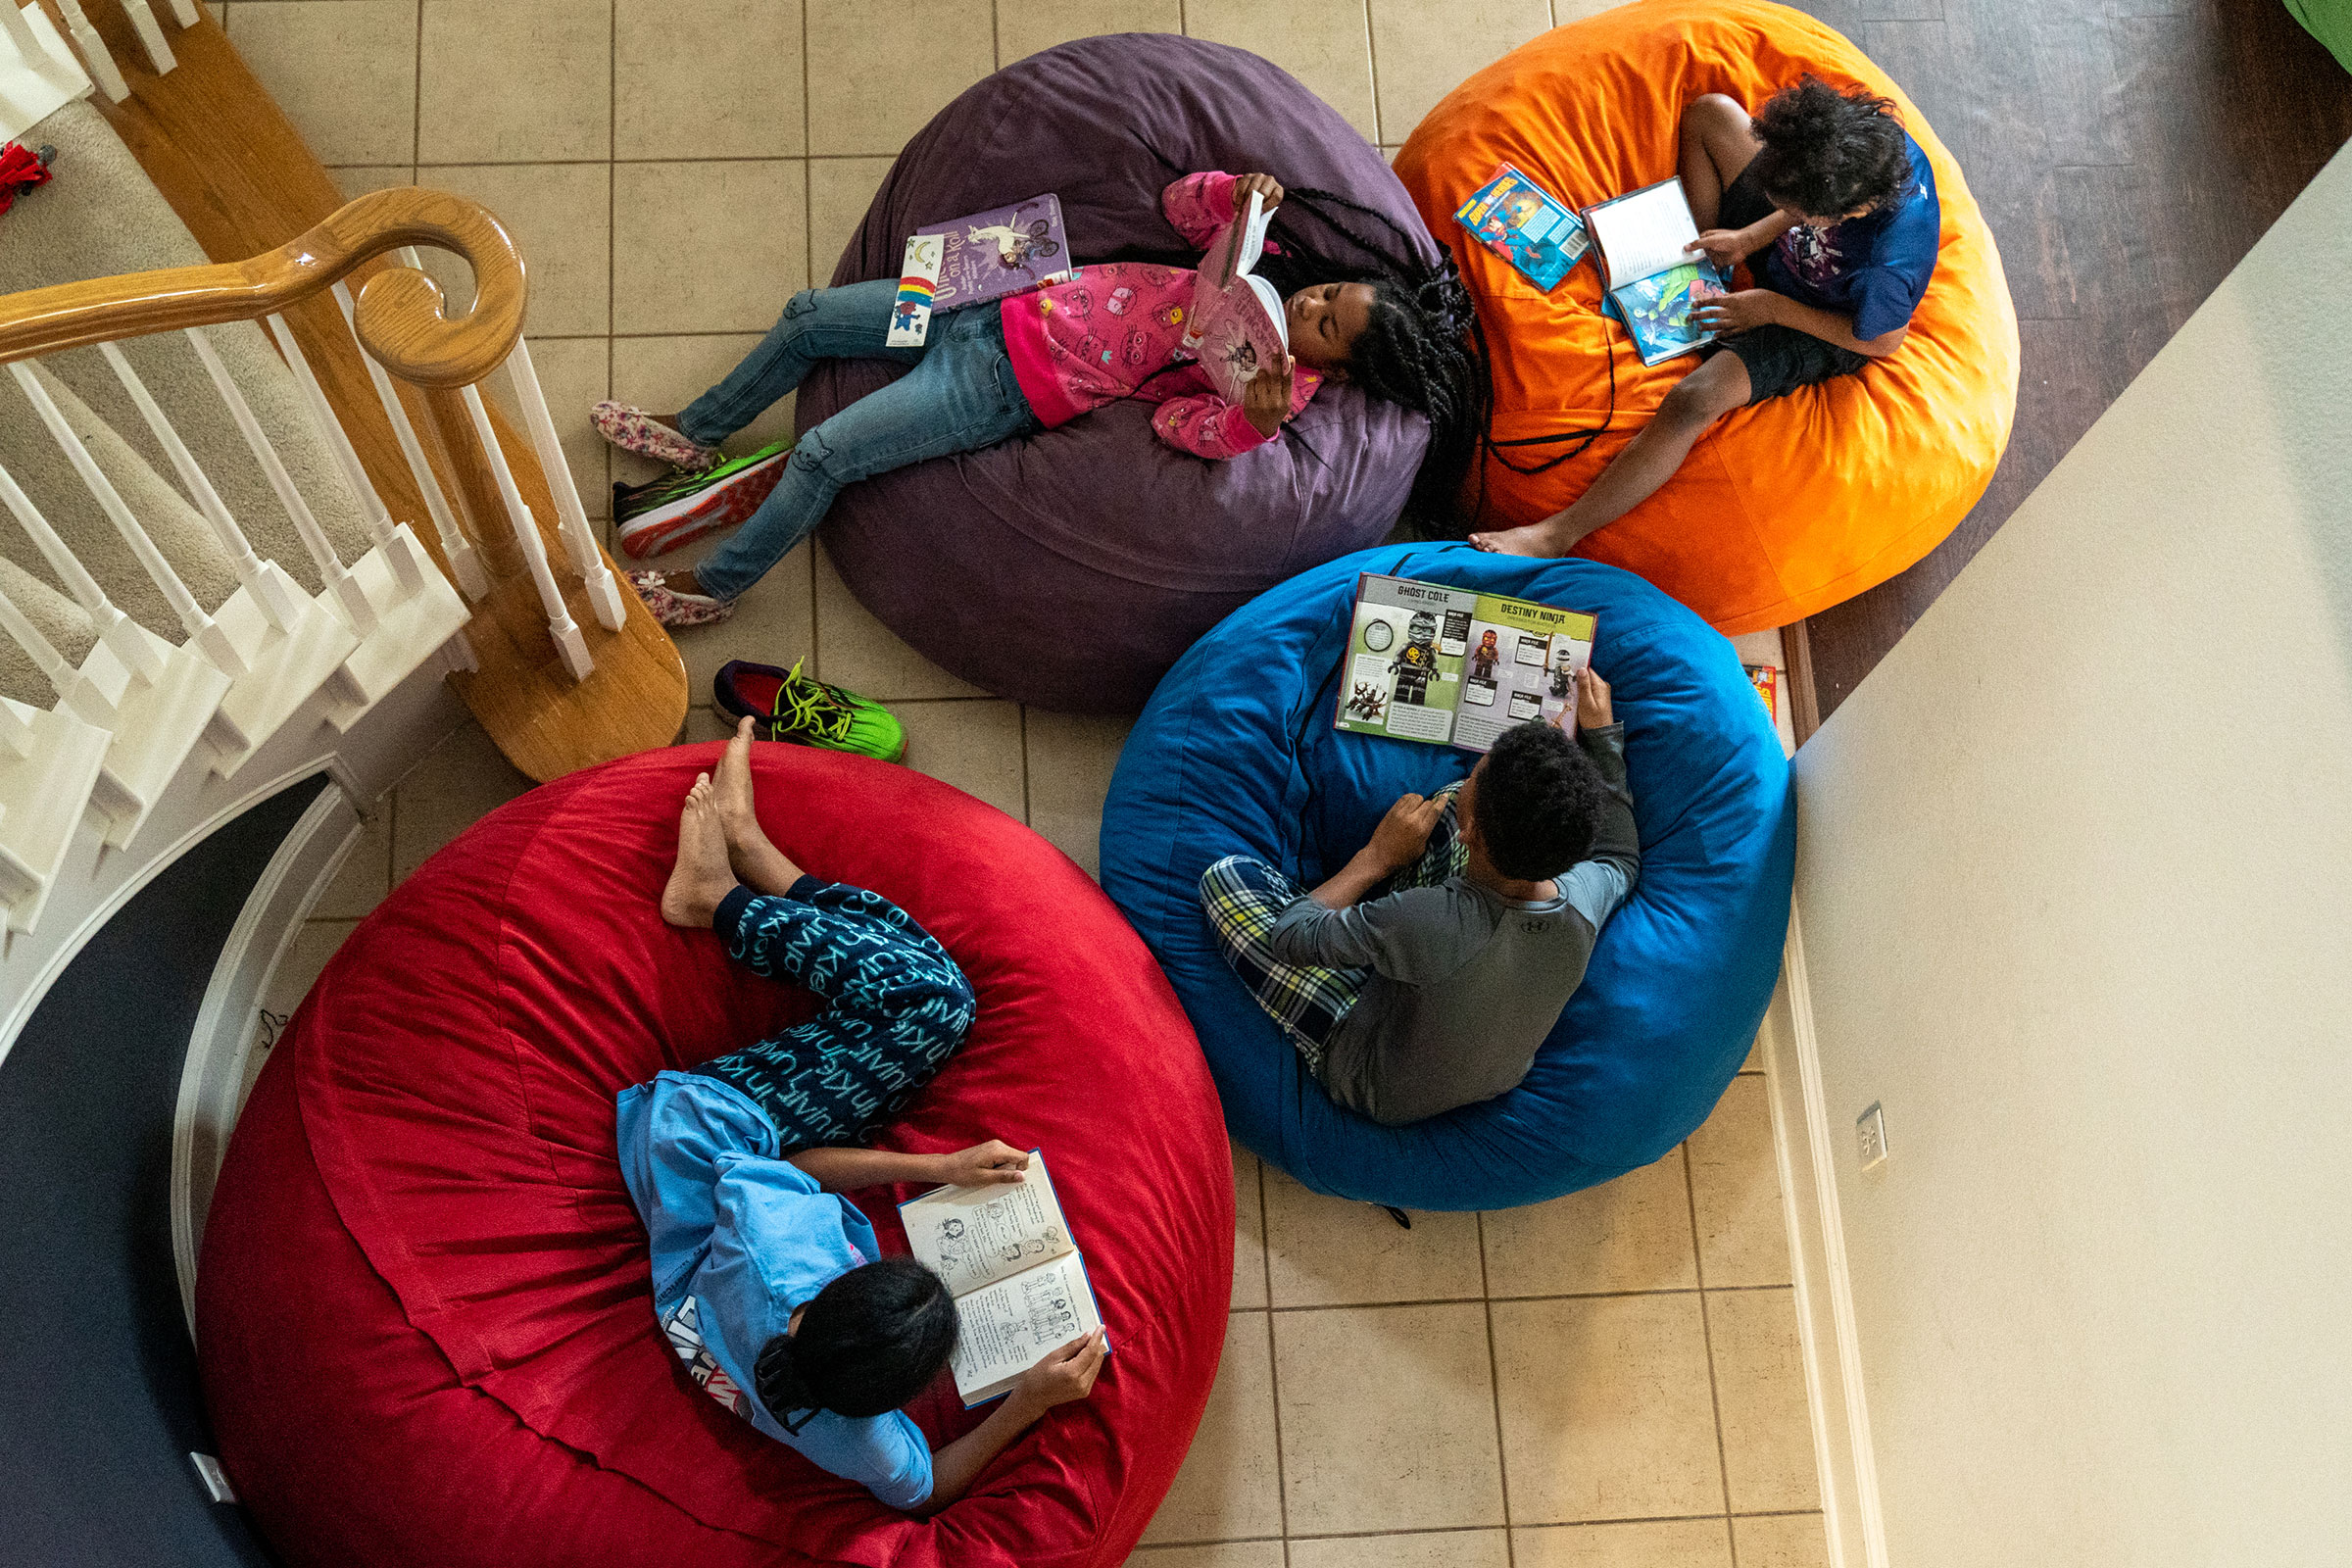 RICHARDSON, TEXAS - February 23, 2022: Four of the Thomas siblings read in beanbag chairs in the entryway of the family's home. Ilana Panich-Linsman for TIME